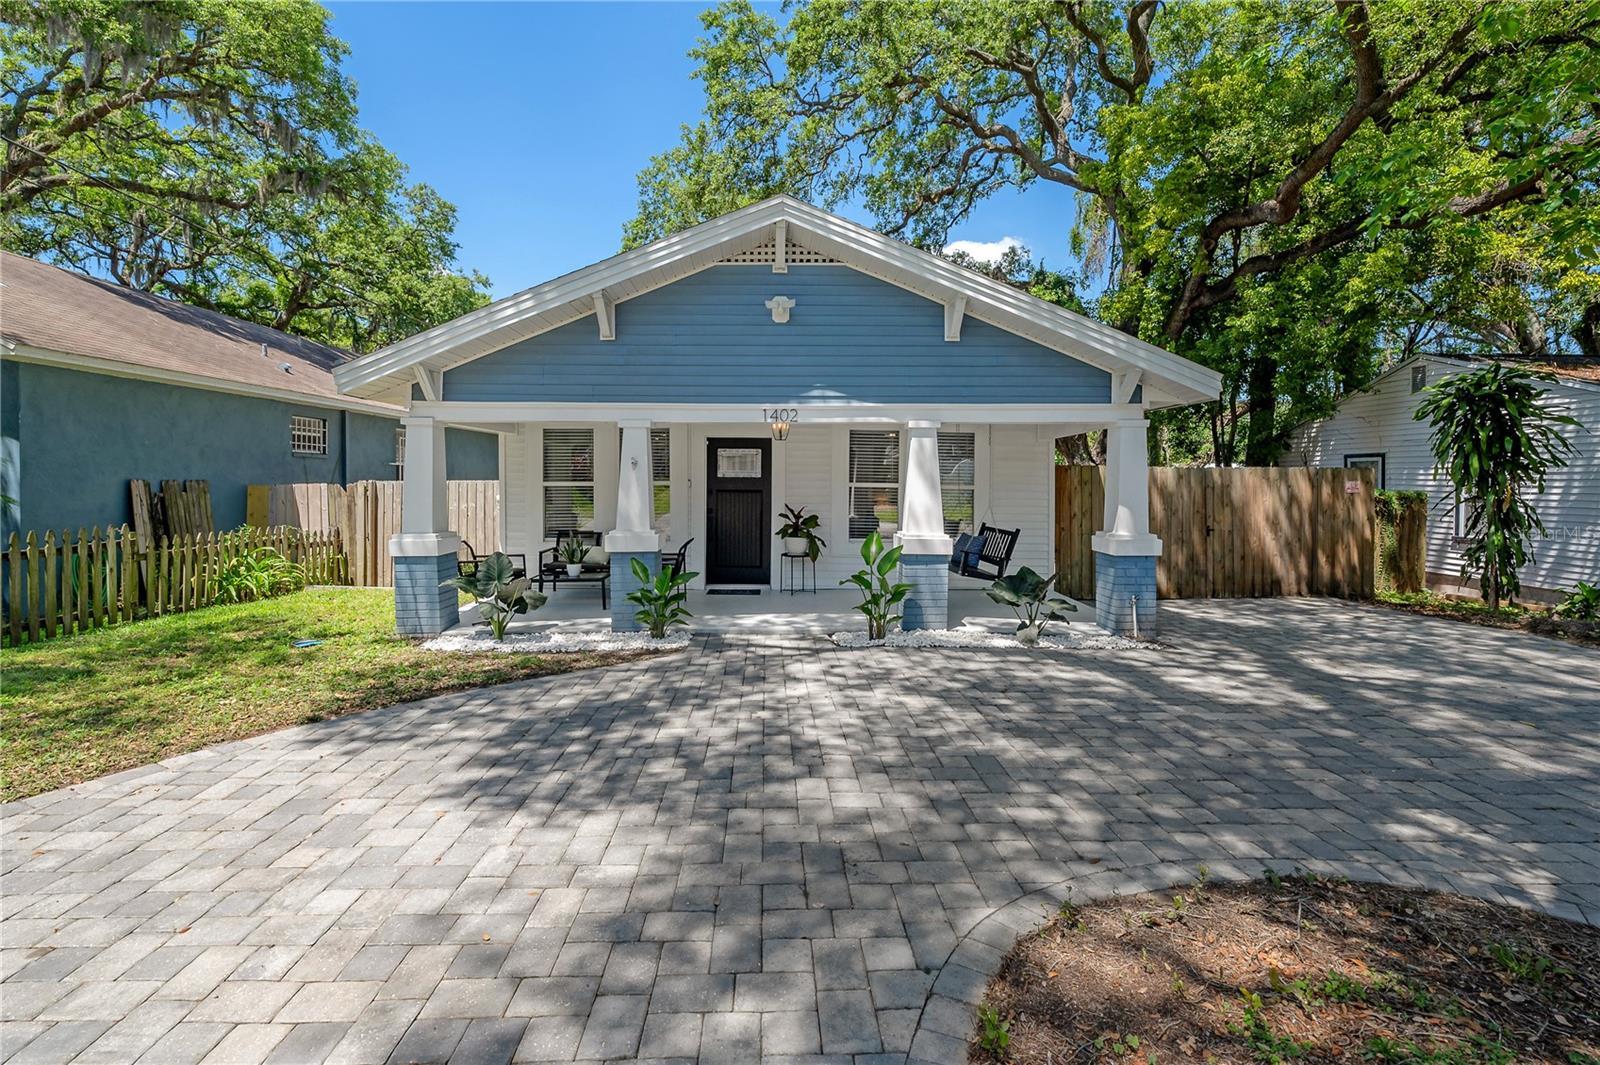 Photo one of 1402 E Curtis St Tampa FL 33603 | MLS T3519526